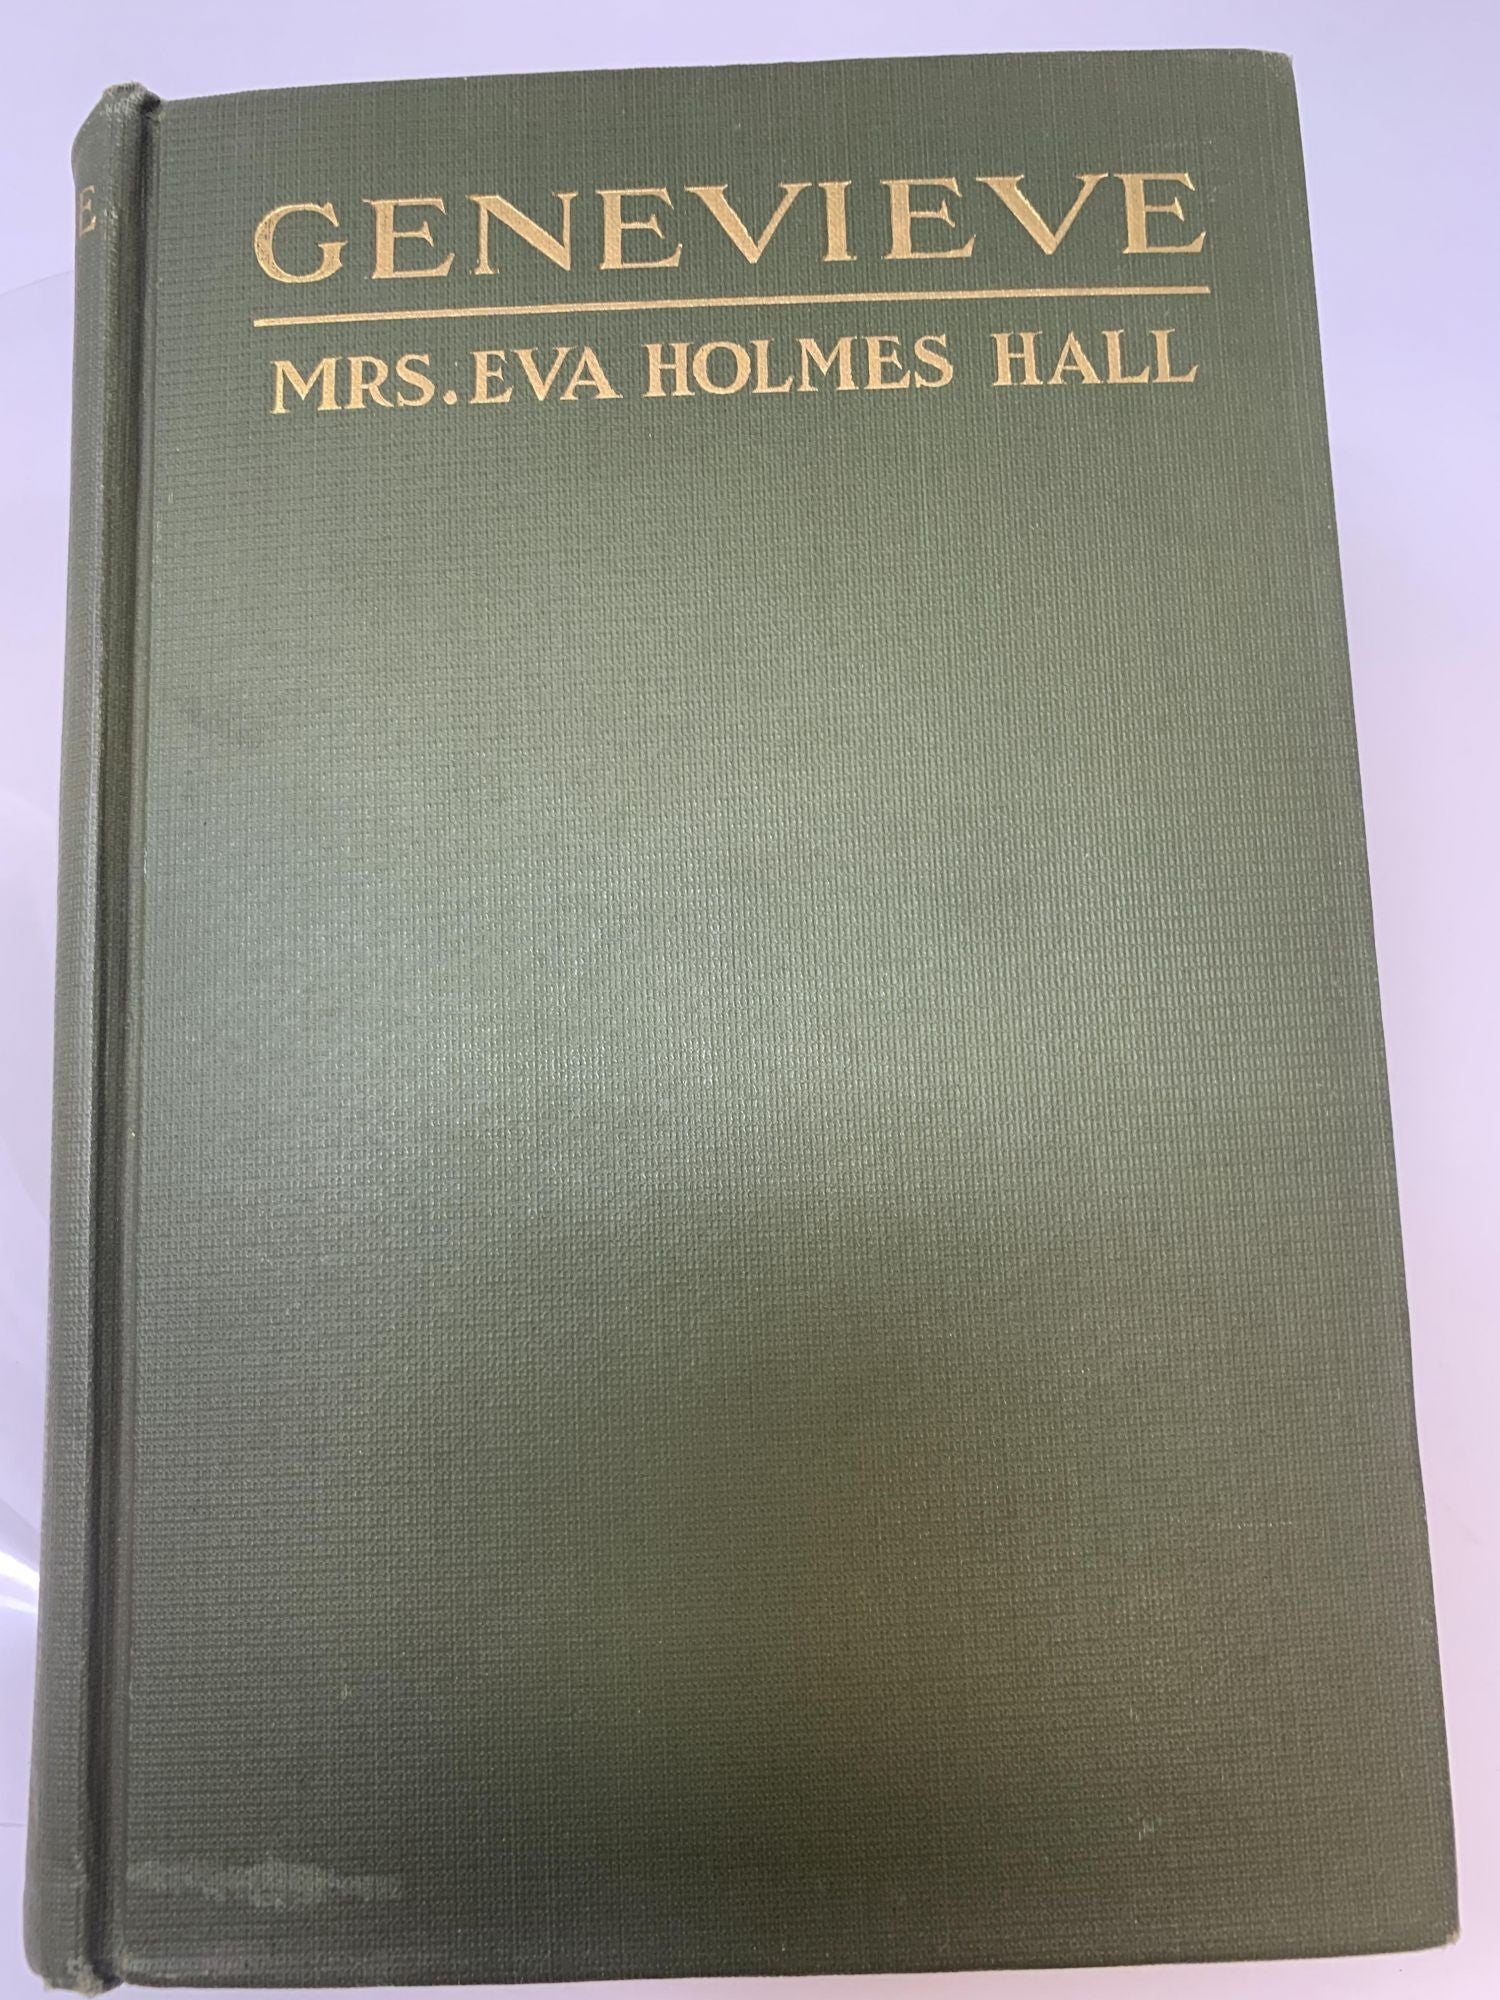 Hall, Eva Holmes (Mrs.) - Genevieve: A Story of Southern Life Before the War of the States